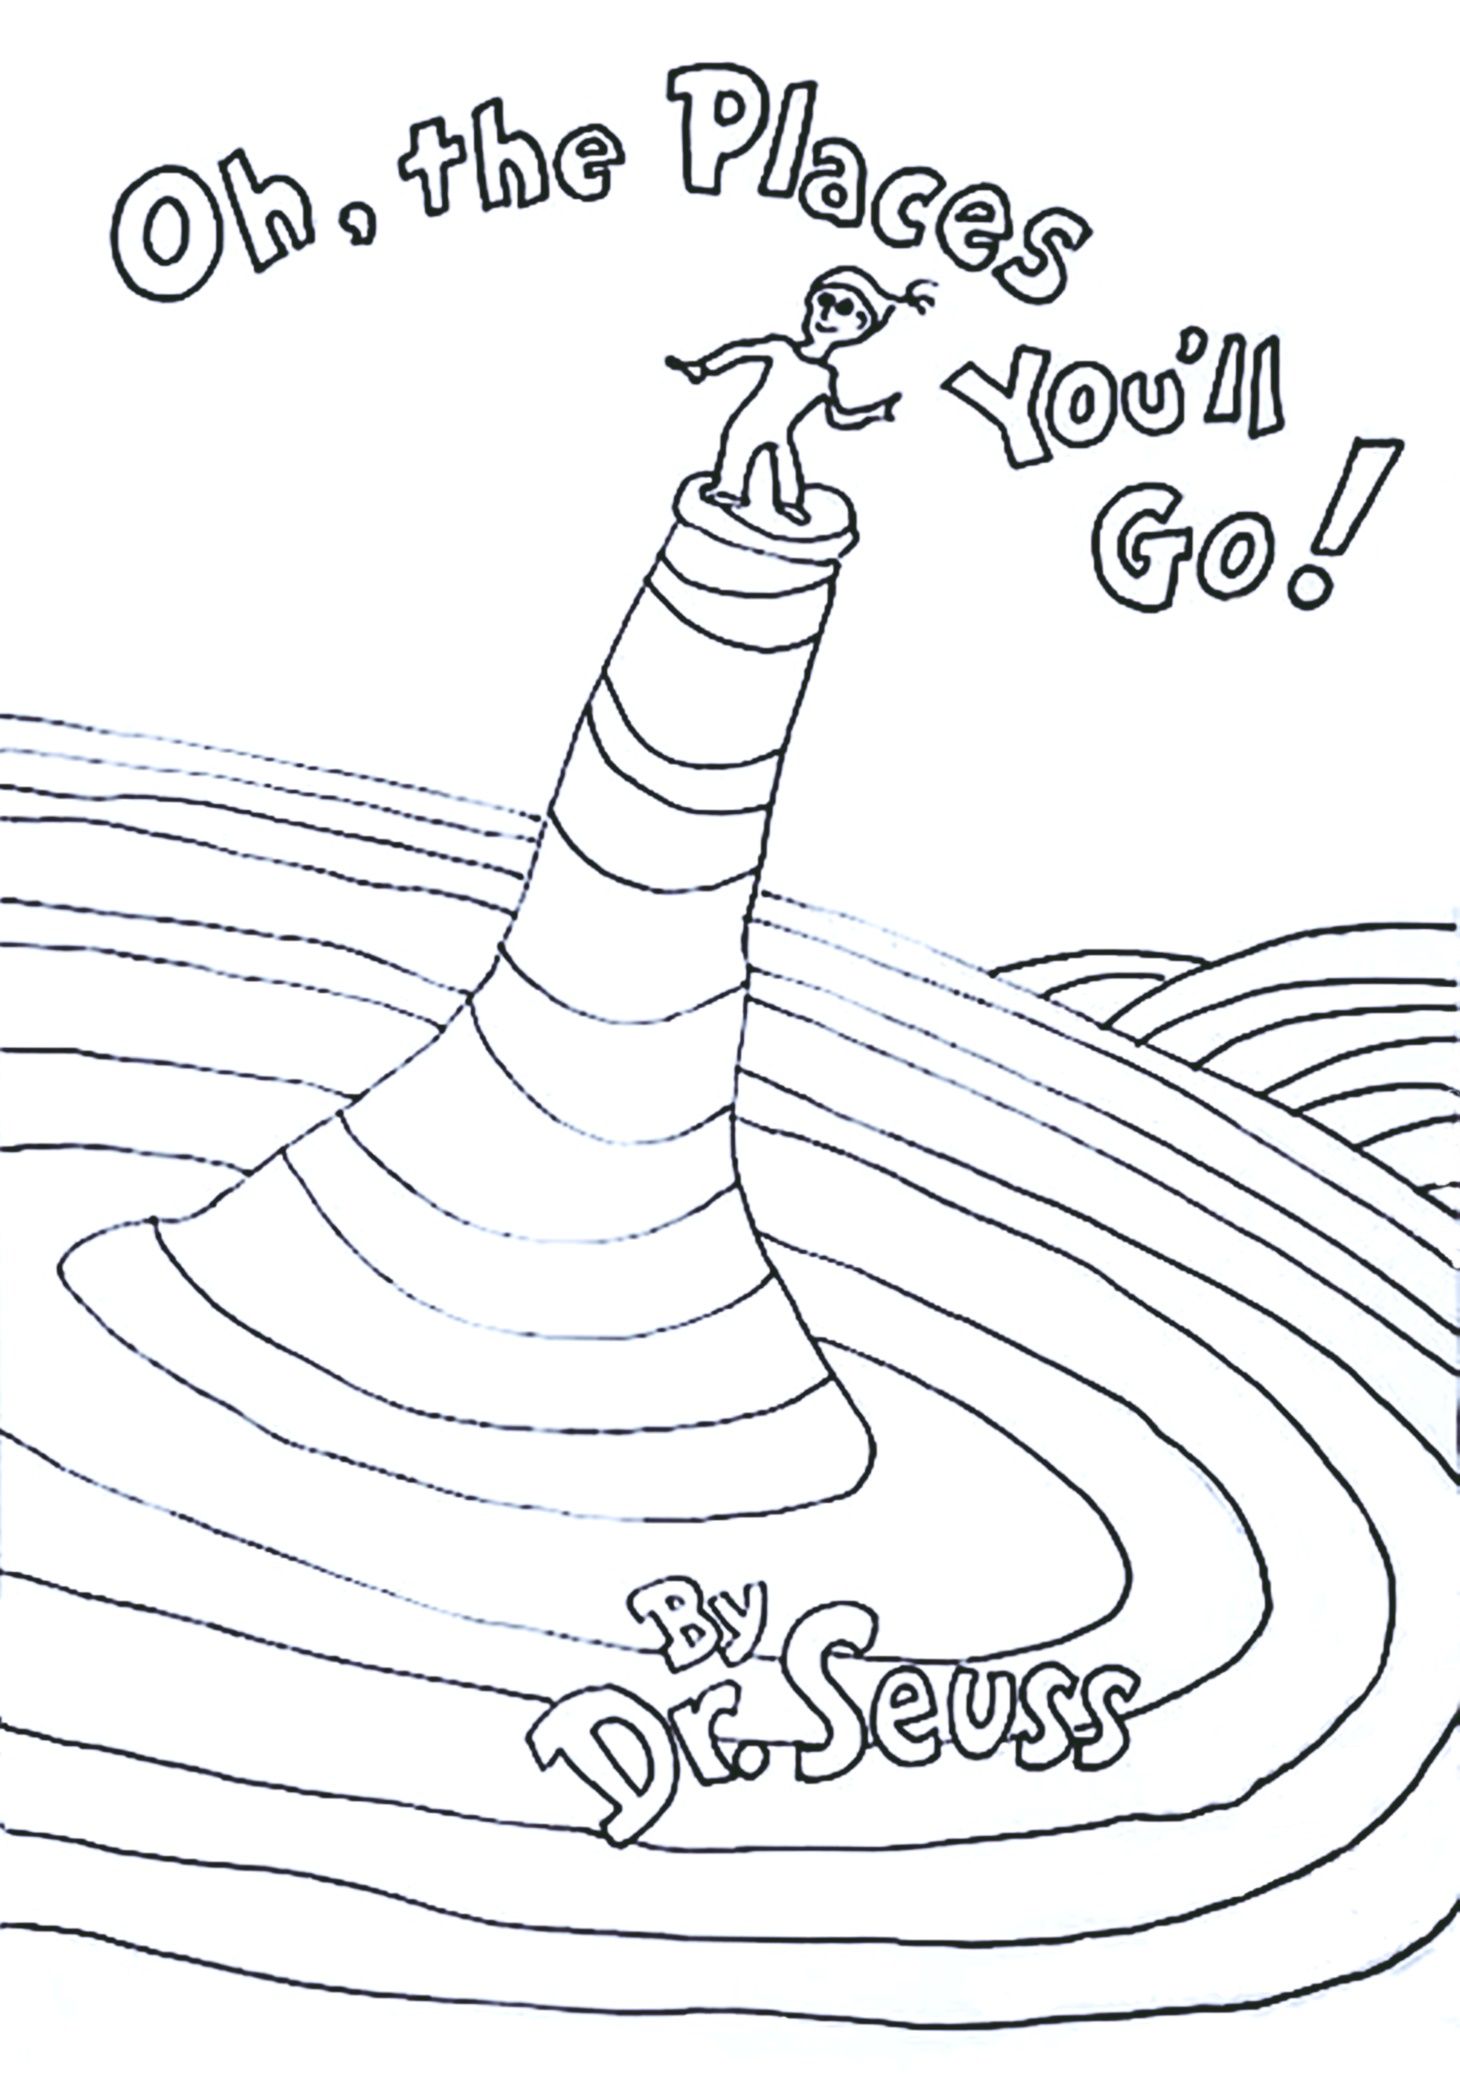 Dr. Seuss Coloring Pages Oh The Places You'll Go